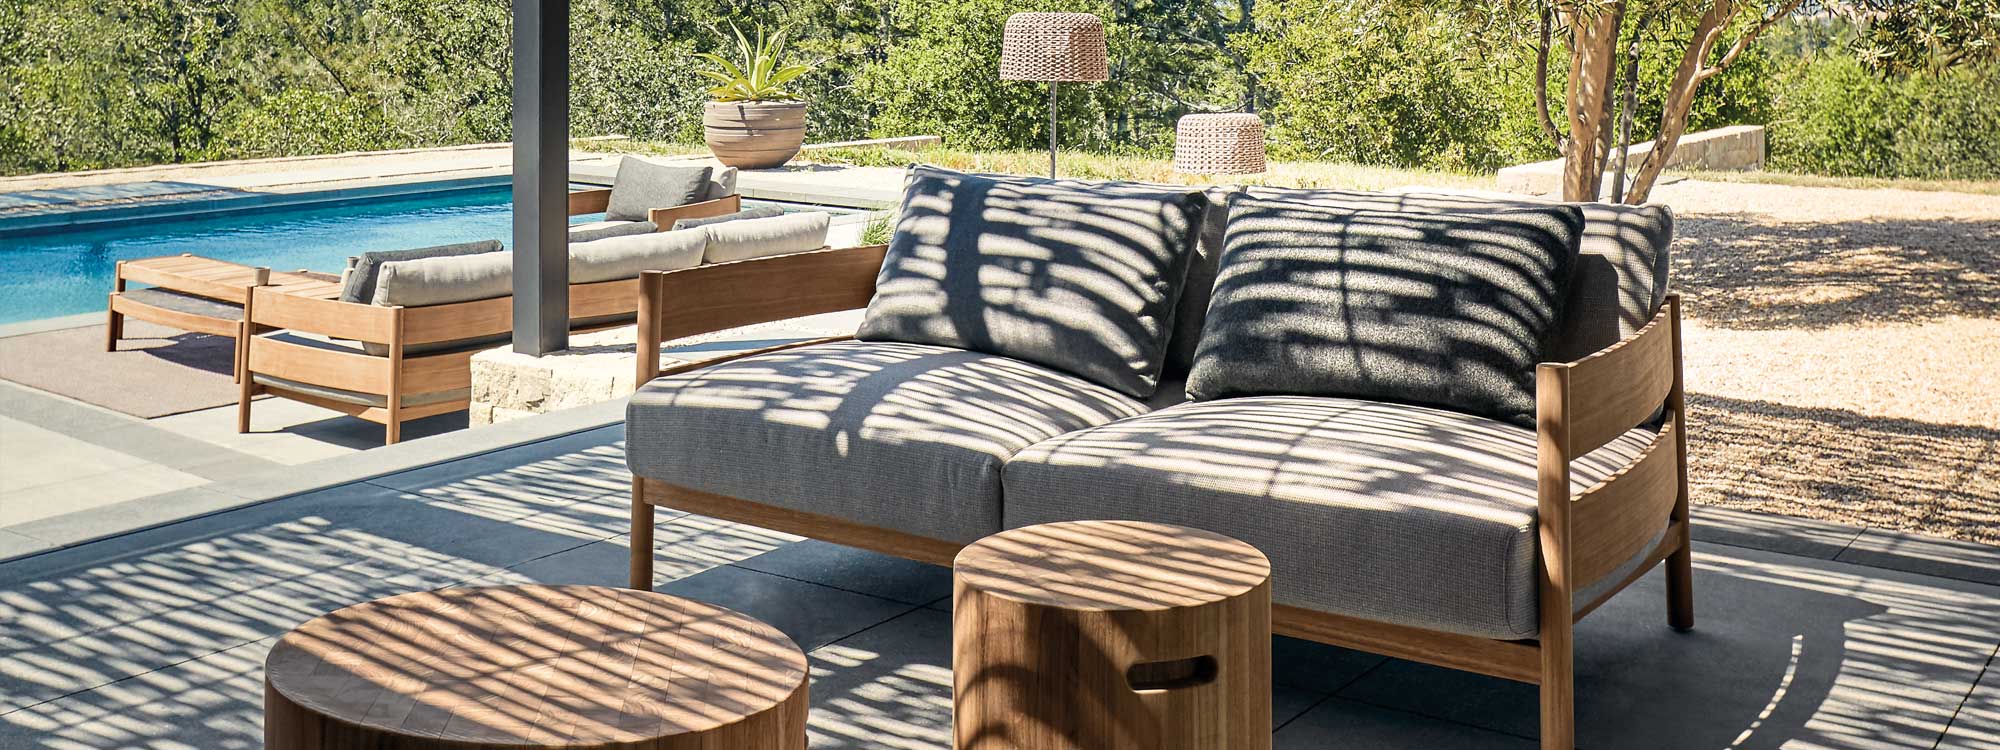 Image of Haven contemporary teak sofas in sun and shade beneath pergola, with more Haven lounge furniture by Gloster in the background next to swimming pool